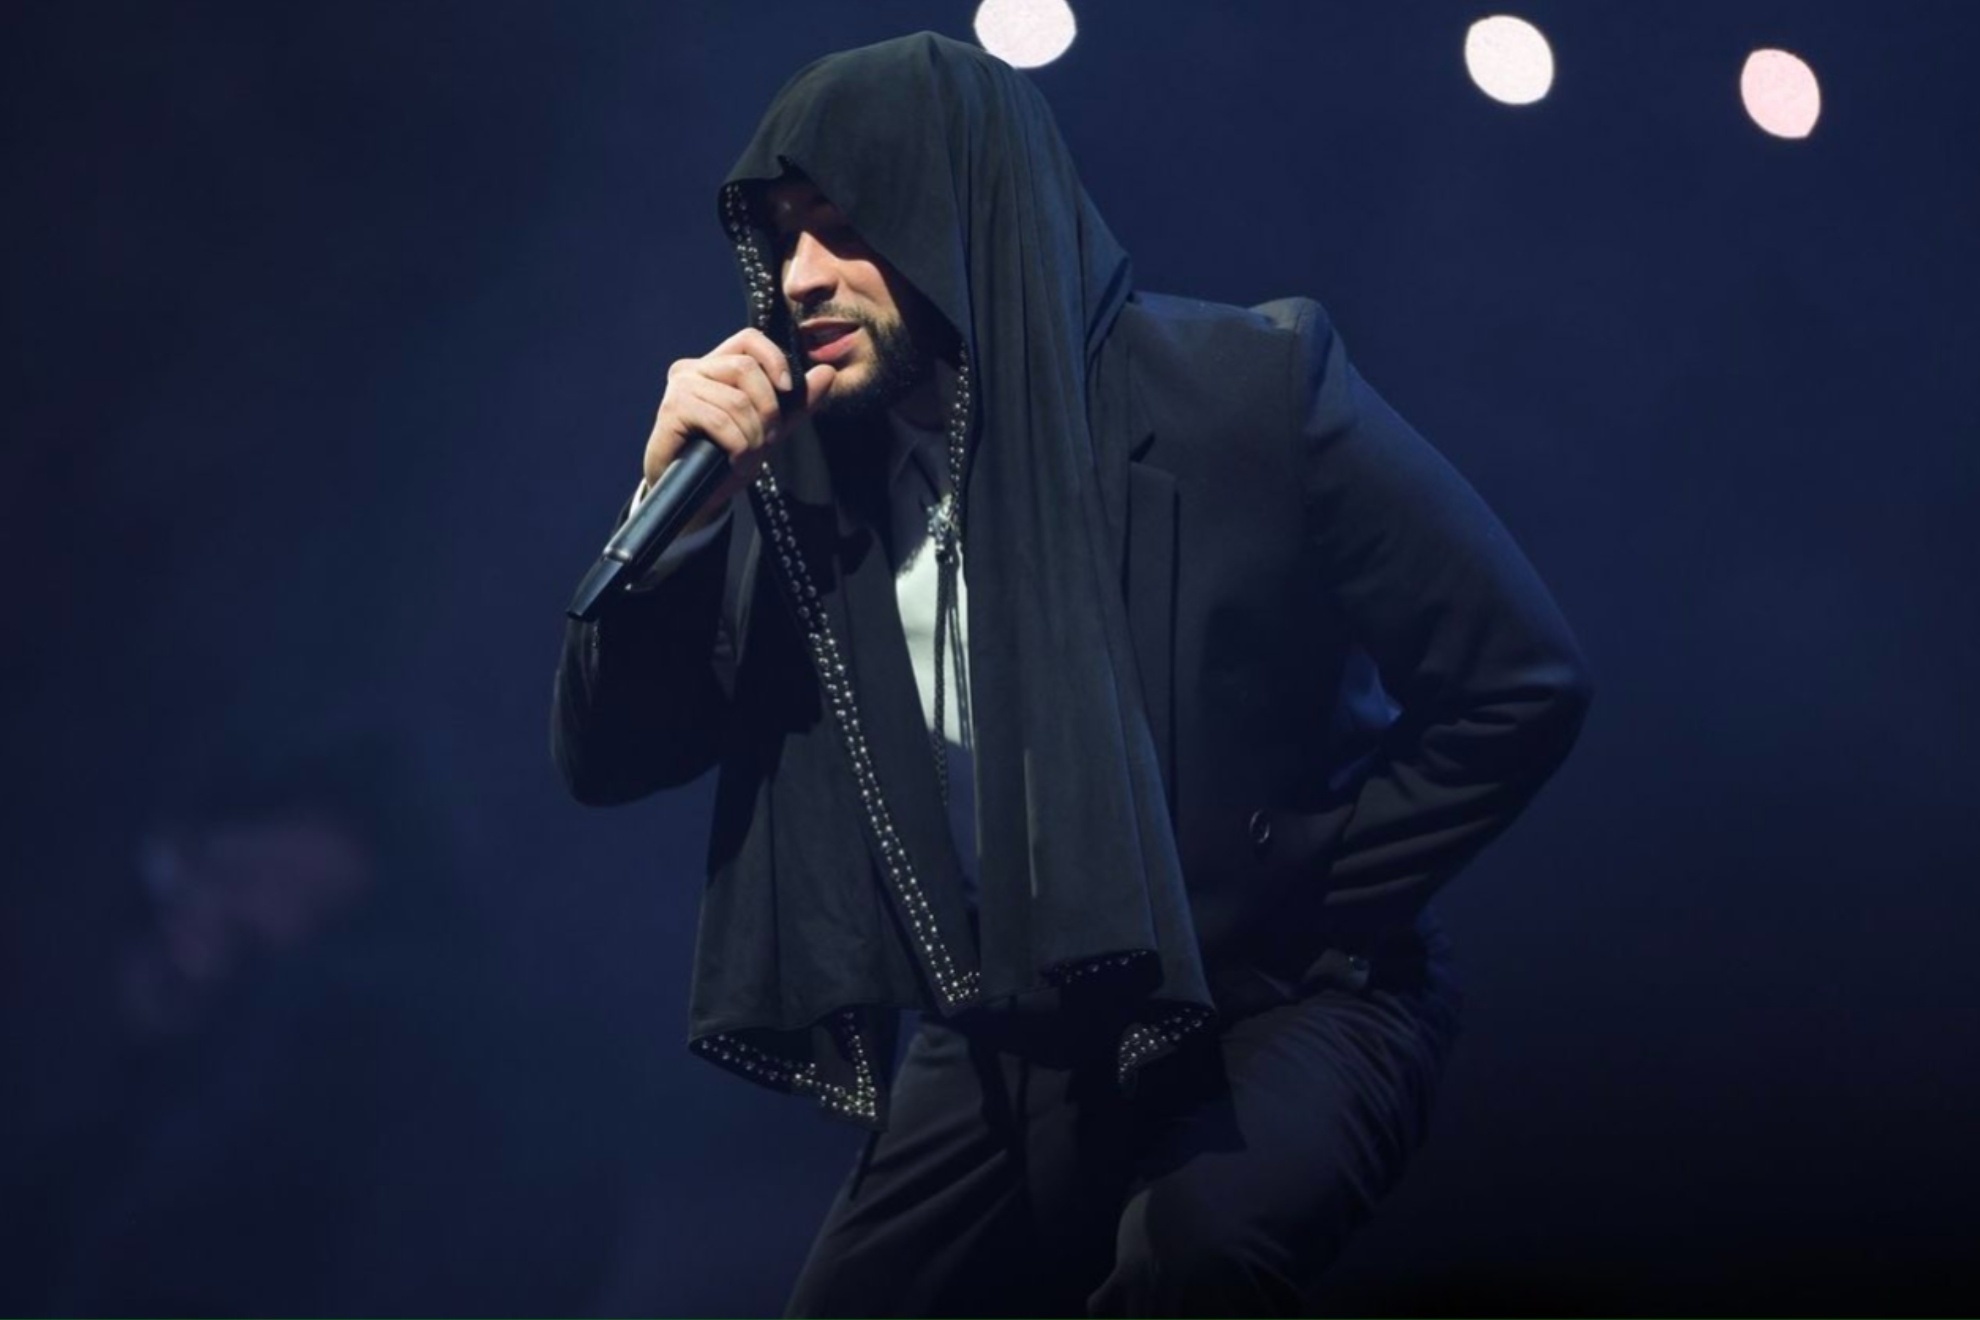 Bad Bunny kicked off his Most Wanted tour on Wednesday night